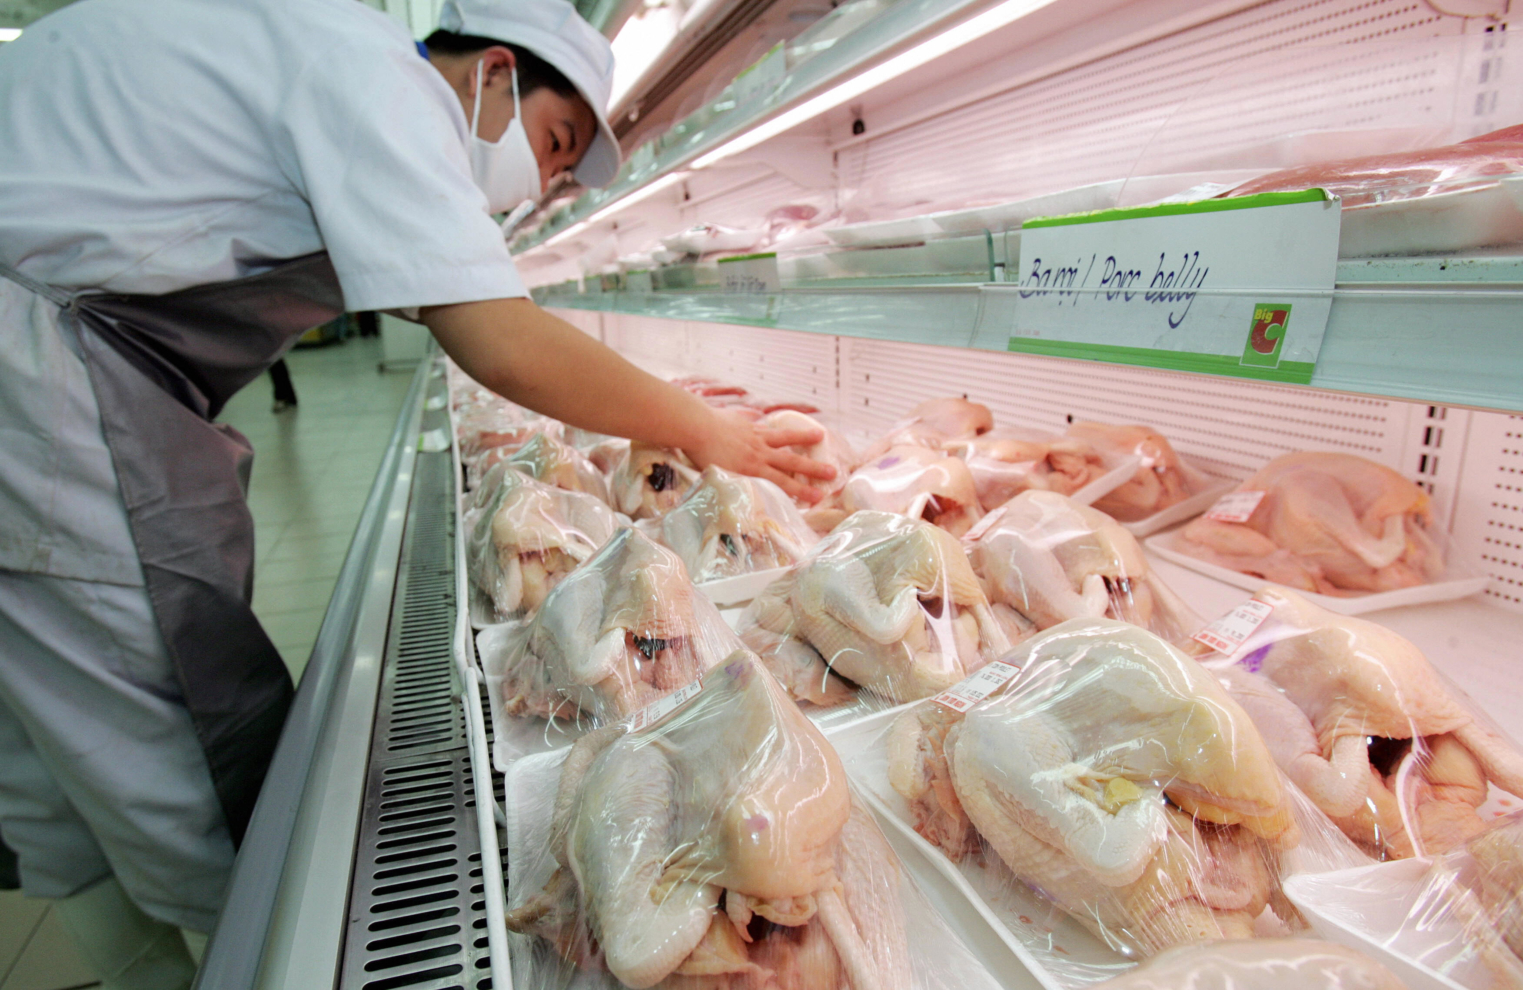 Hanoi, VIET NAM: An employee arranges frozen chicken on sale at a supermarket in Hanoi on 10 March 2006. Vietnam's poultry sector has been ravaged by bird flu, but a lull in infections has left producers divided on whether to slow down or forge ahead and revolutionise the industry. AFP PHOTO/HOANG DINH Nam (Photo credit should read HOANG DINH NAM/AFP via Getty Images)